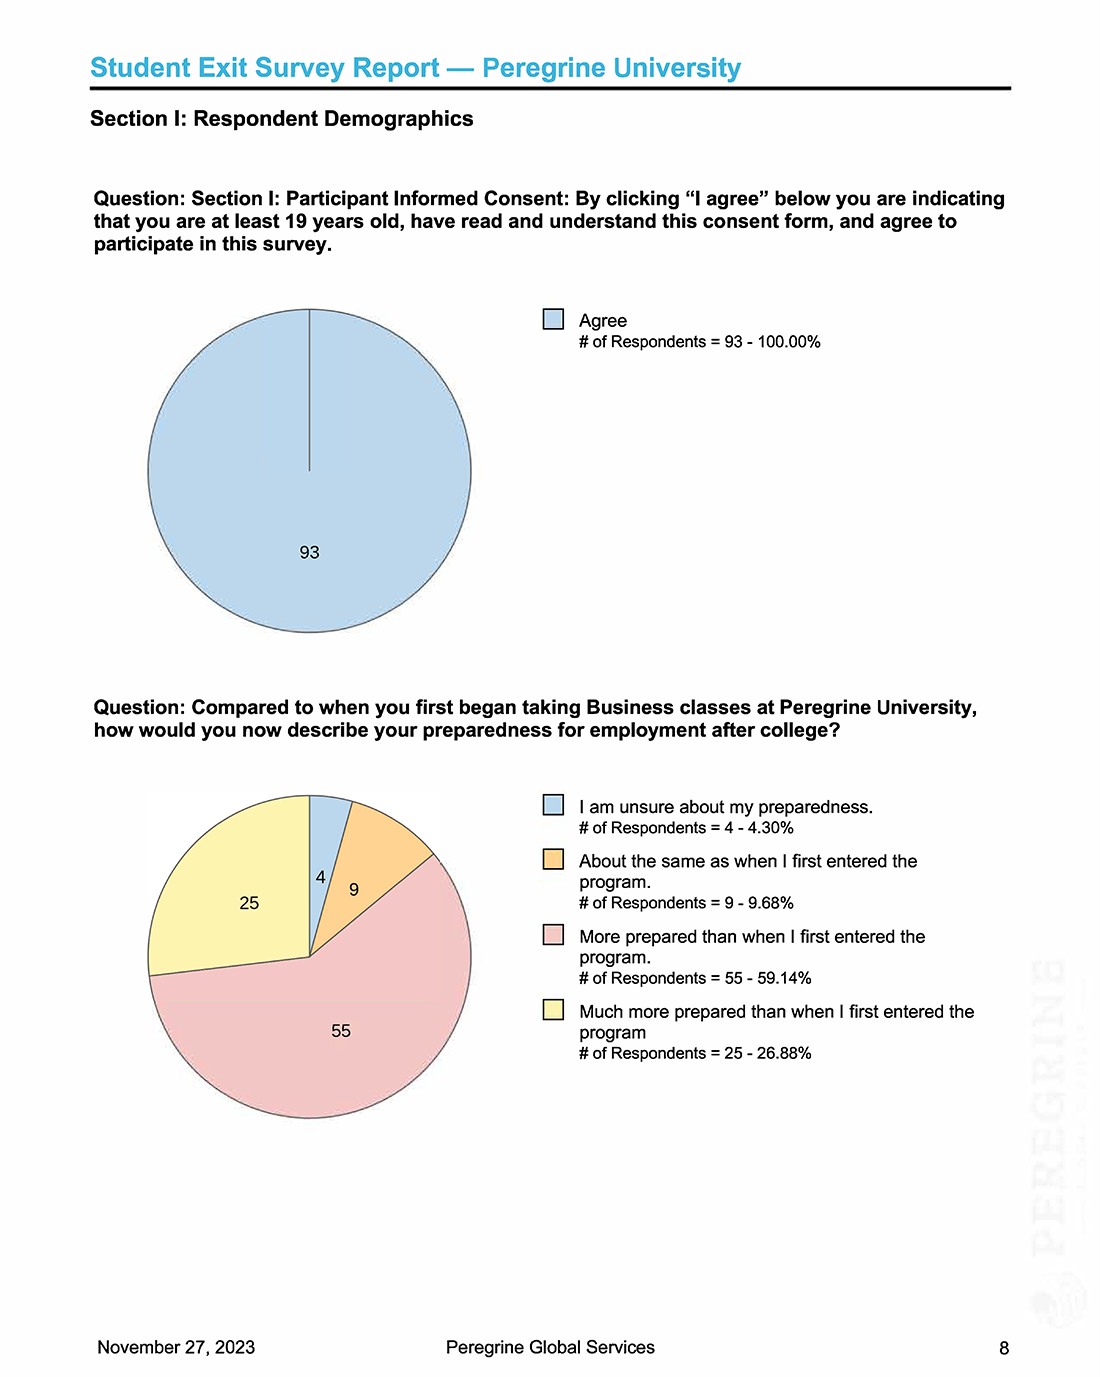 Student Exit Survey Report, Section I: Respondent Demographics (Peregrine Global Services)